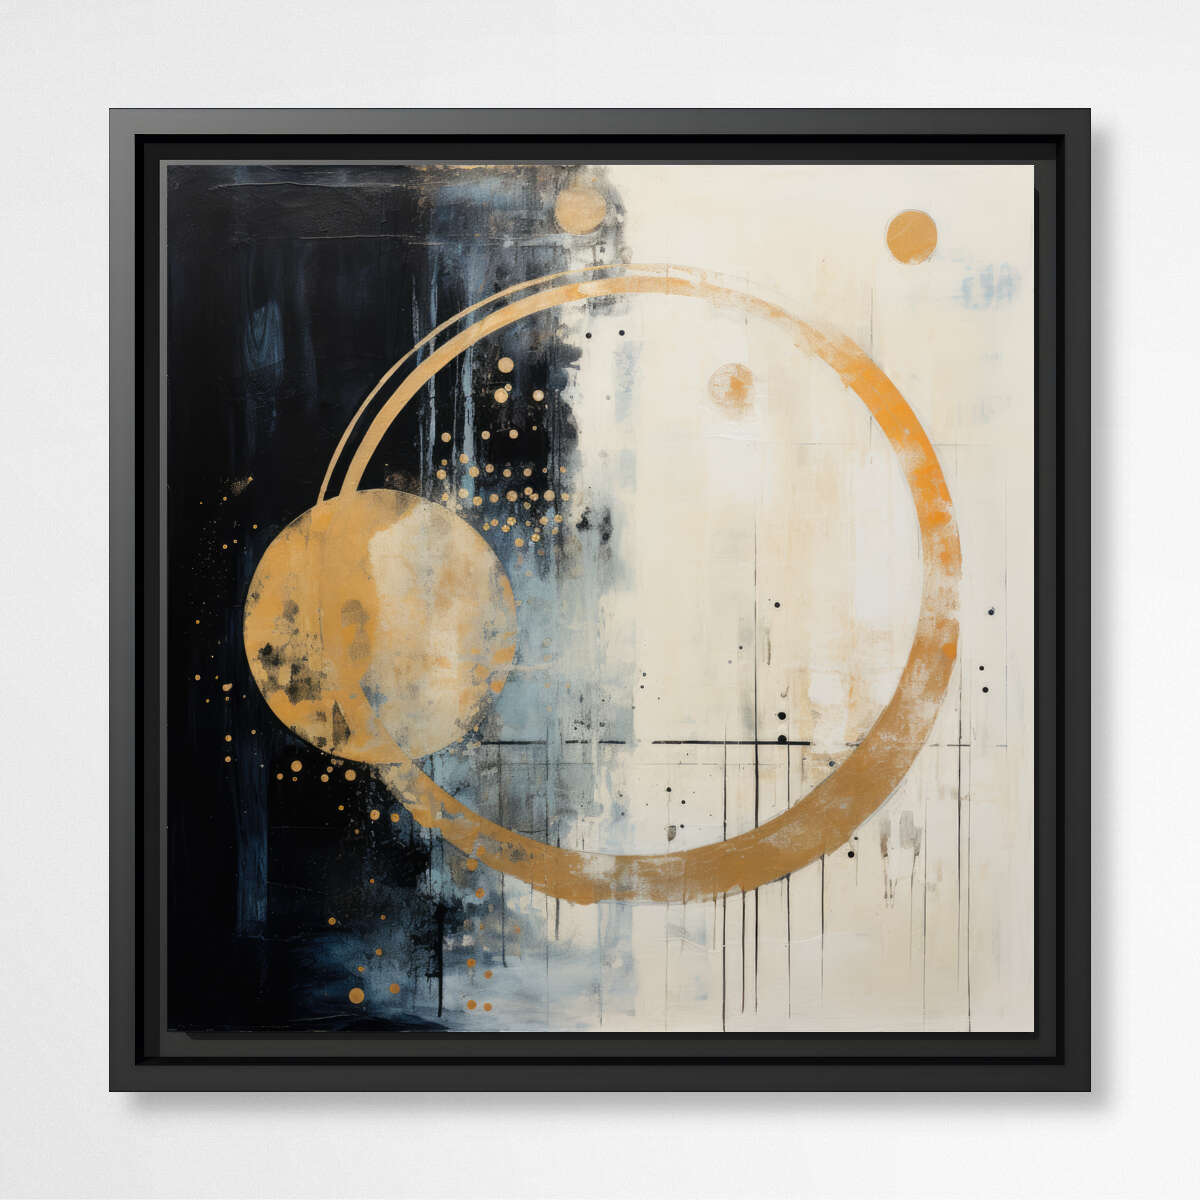 Luminous Spheres Gold and Black | Abstract Wall Art Prints - The Canvas Hive